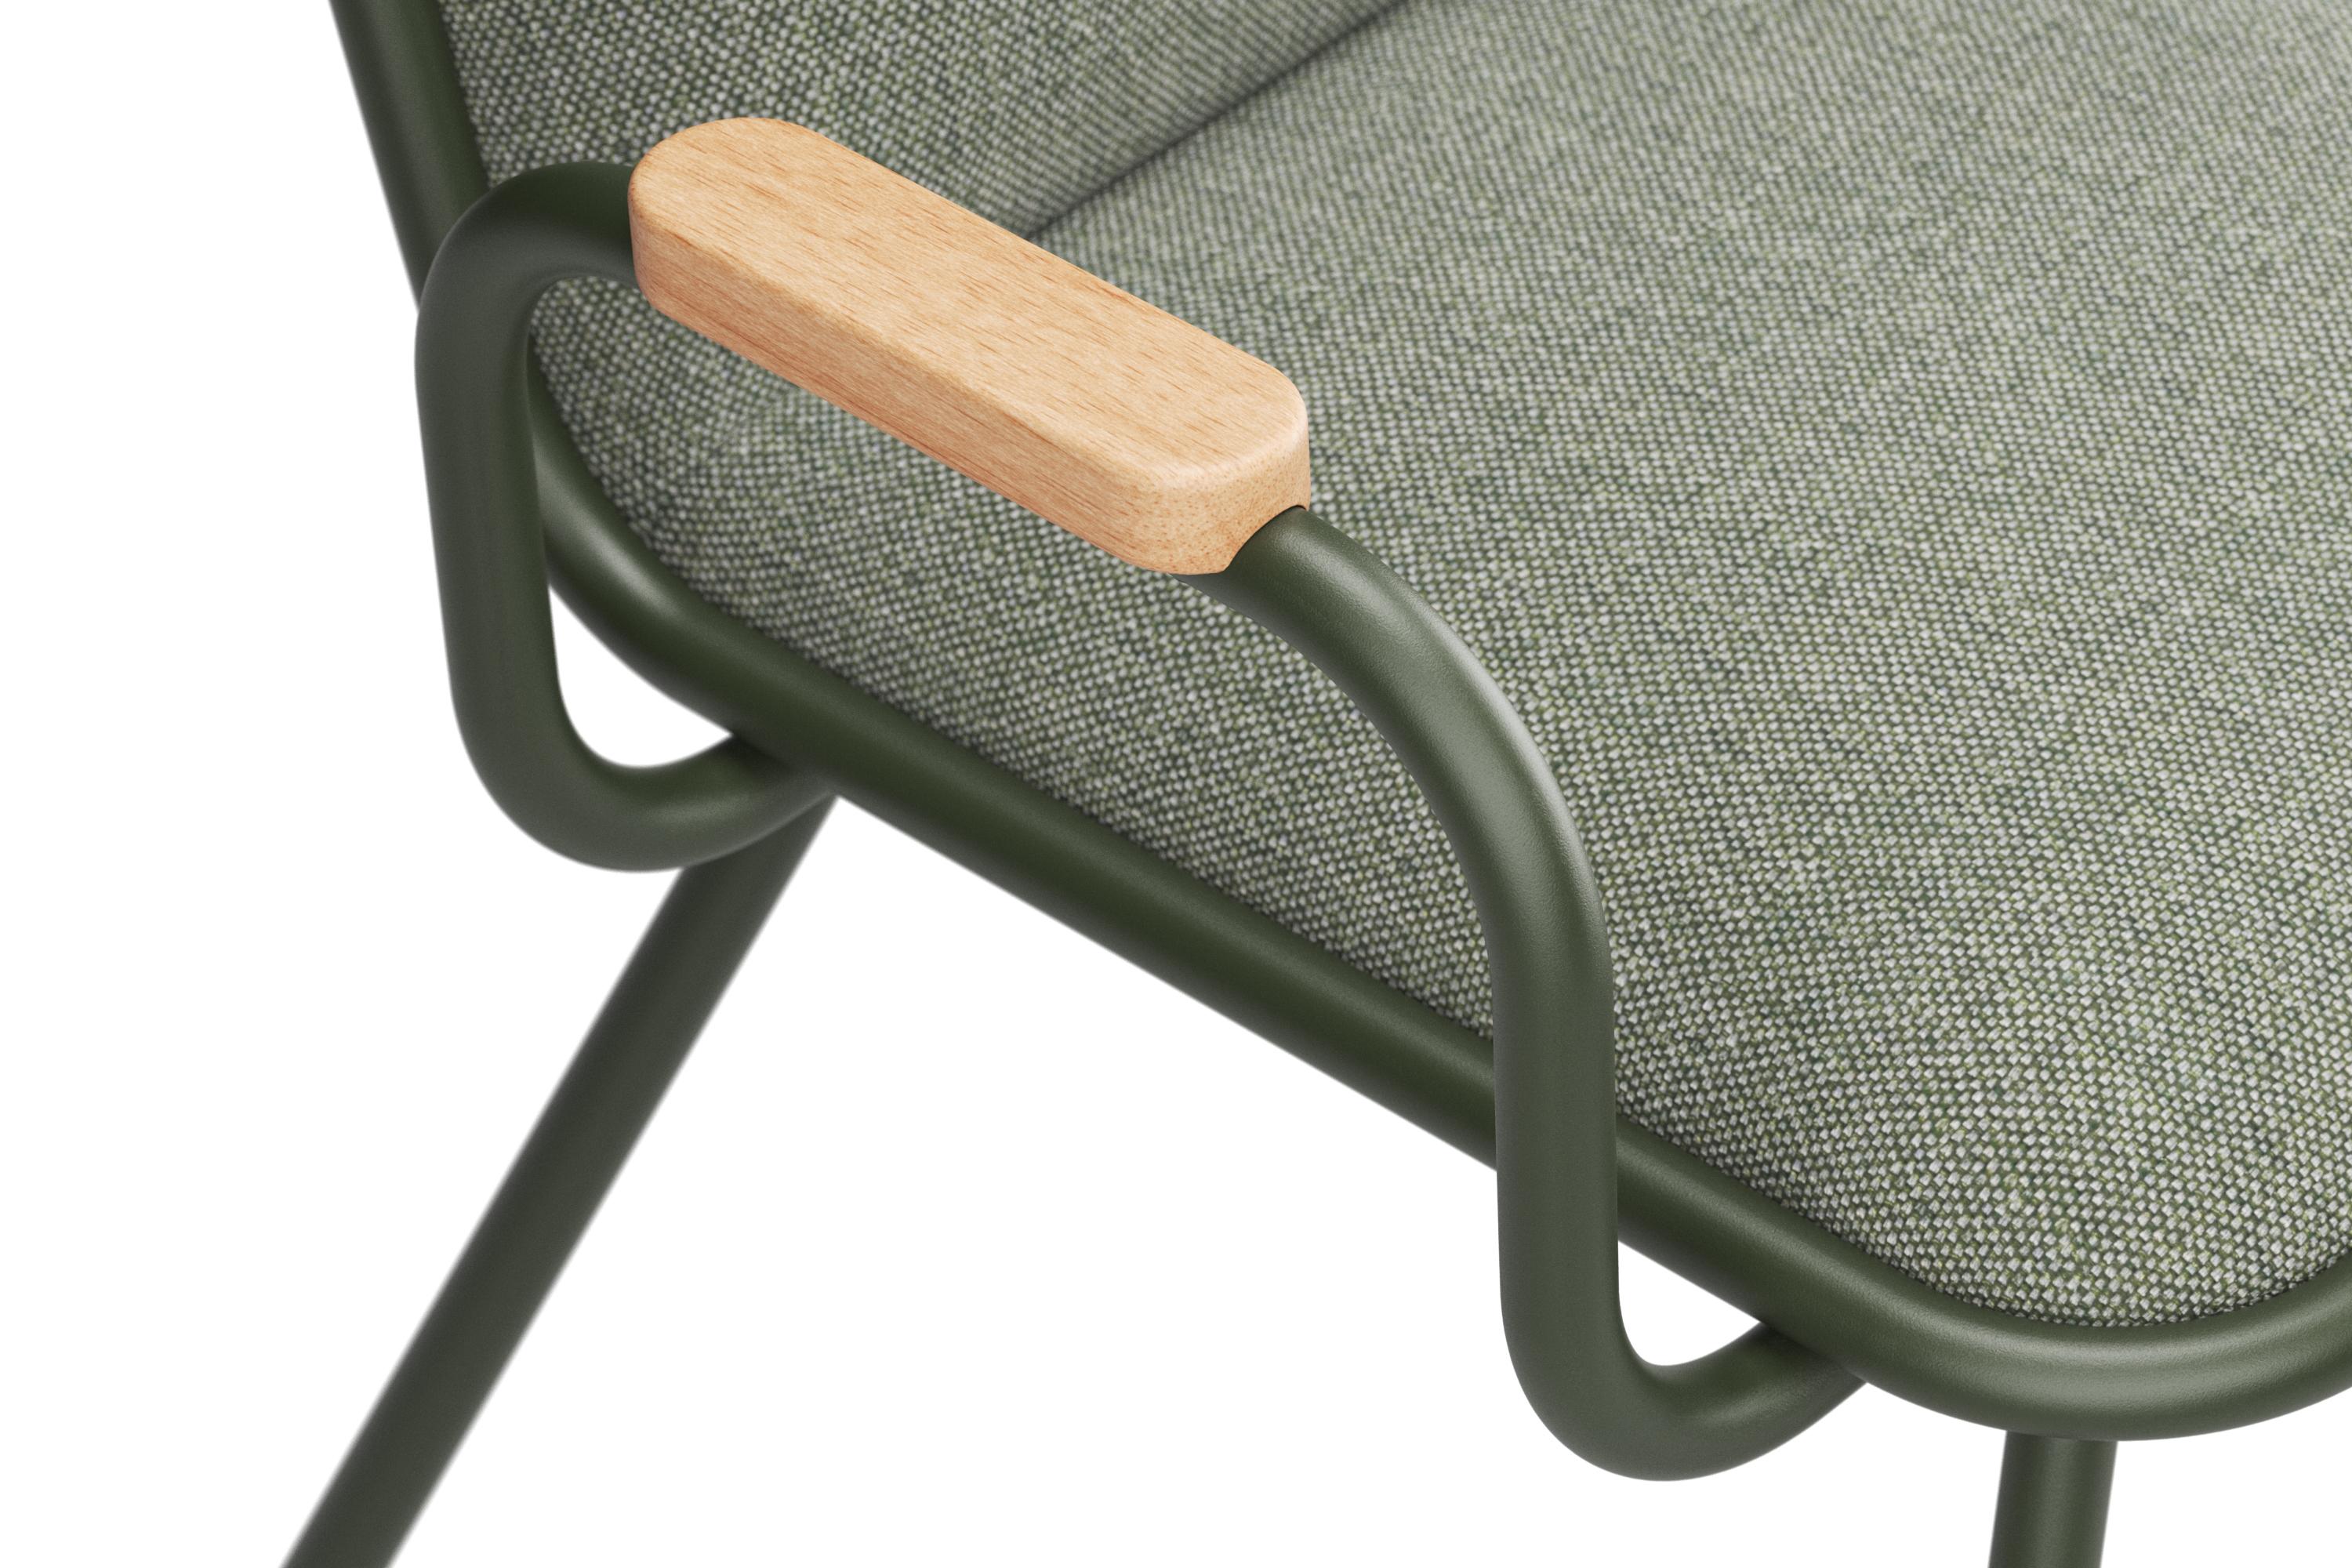 Elevating the classic Dulwich design with the addition of armrests, this Dulwich chair with armrests offers enhanced comfort and support without compromising its timeless appeal. The powder-coated metal frame provides a sturdy foundation, while the